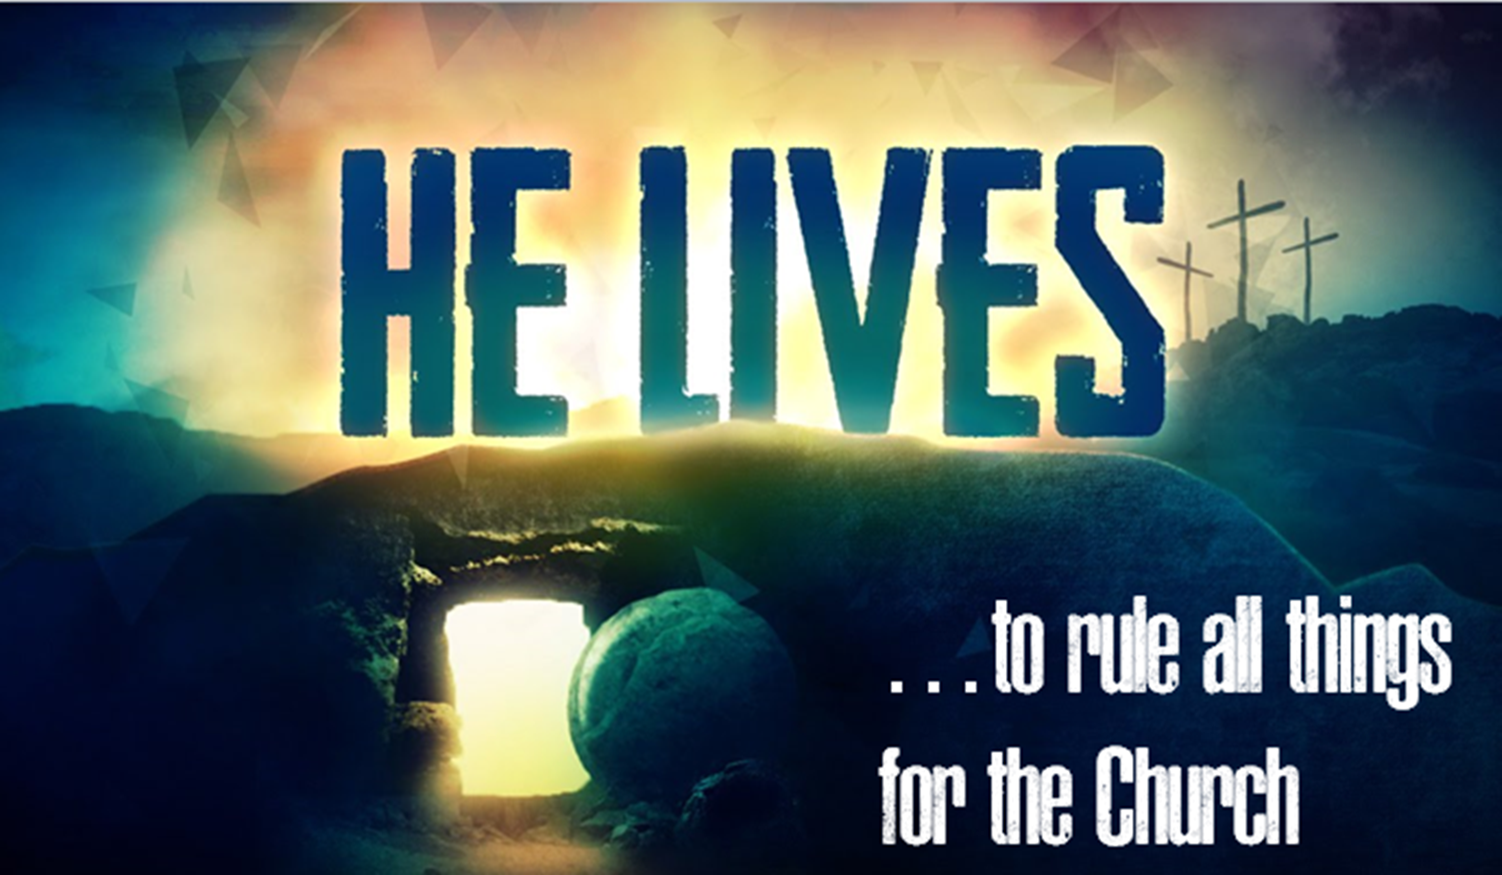 He Lives ..to rule all things for the Church